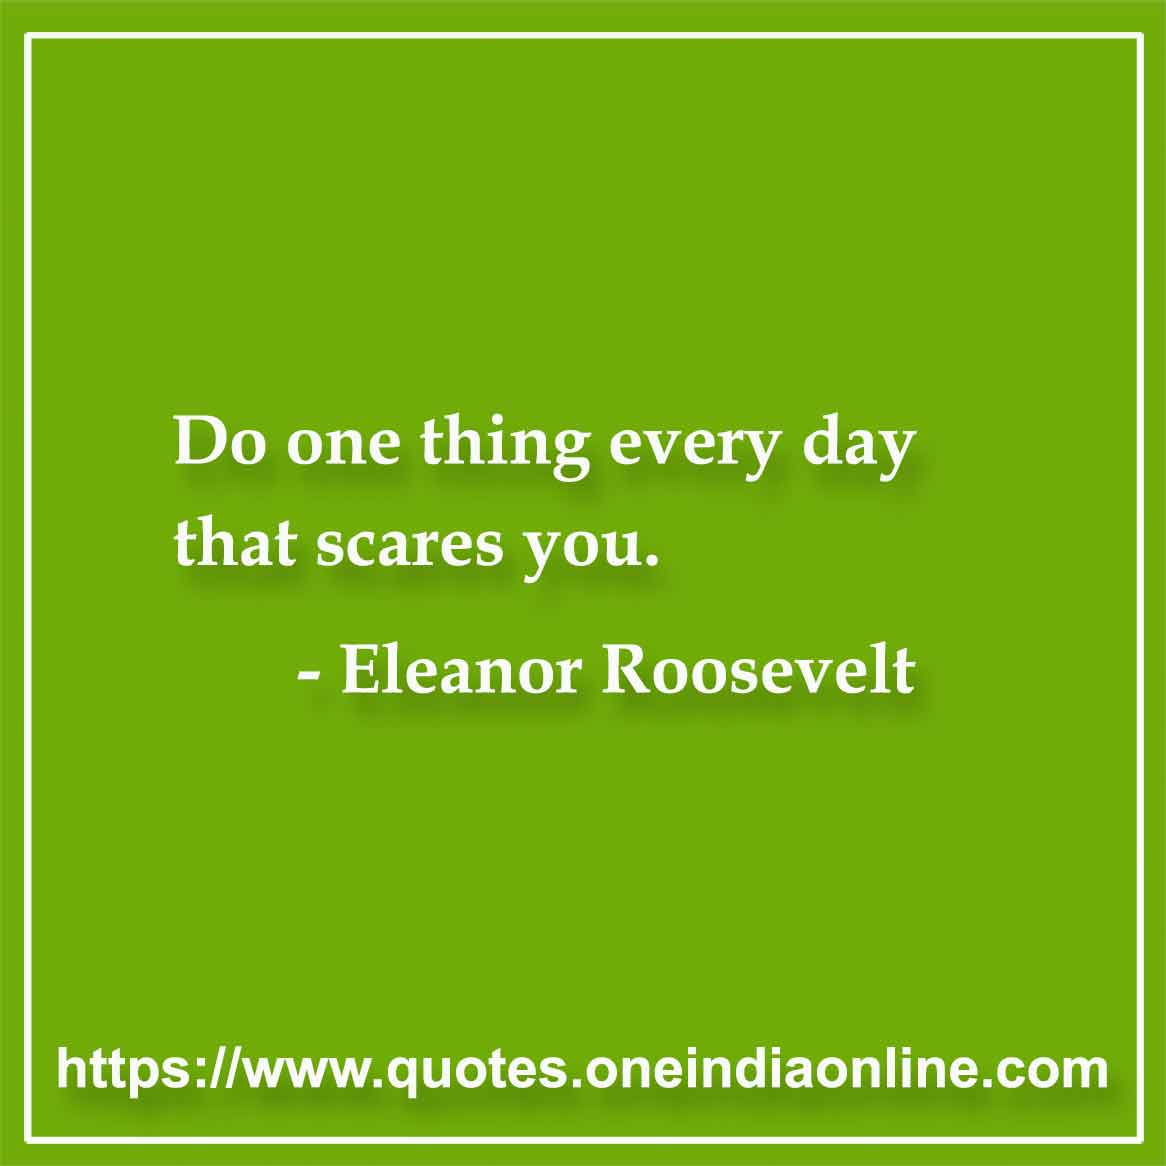 Do one thing every day that scares you.

- Eleanor Roosevelt